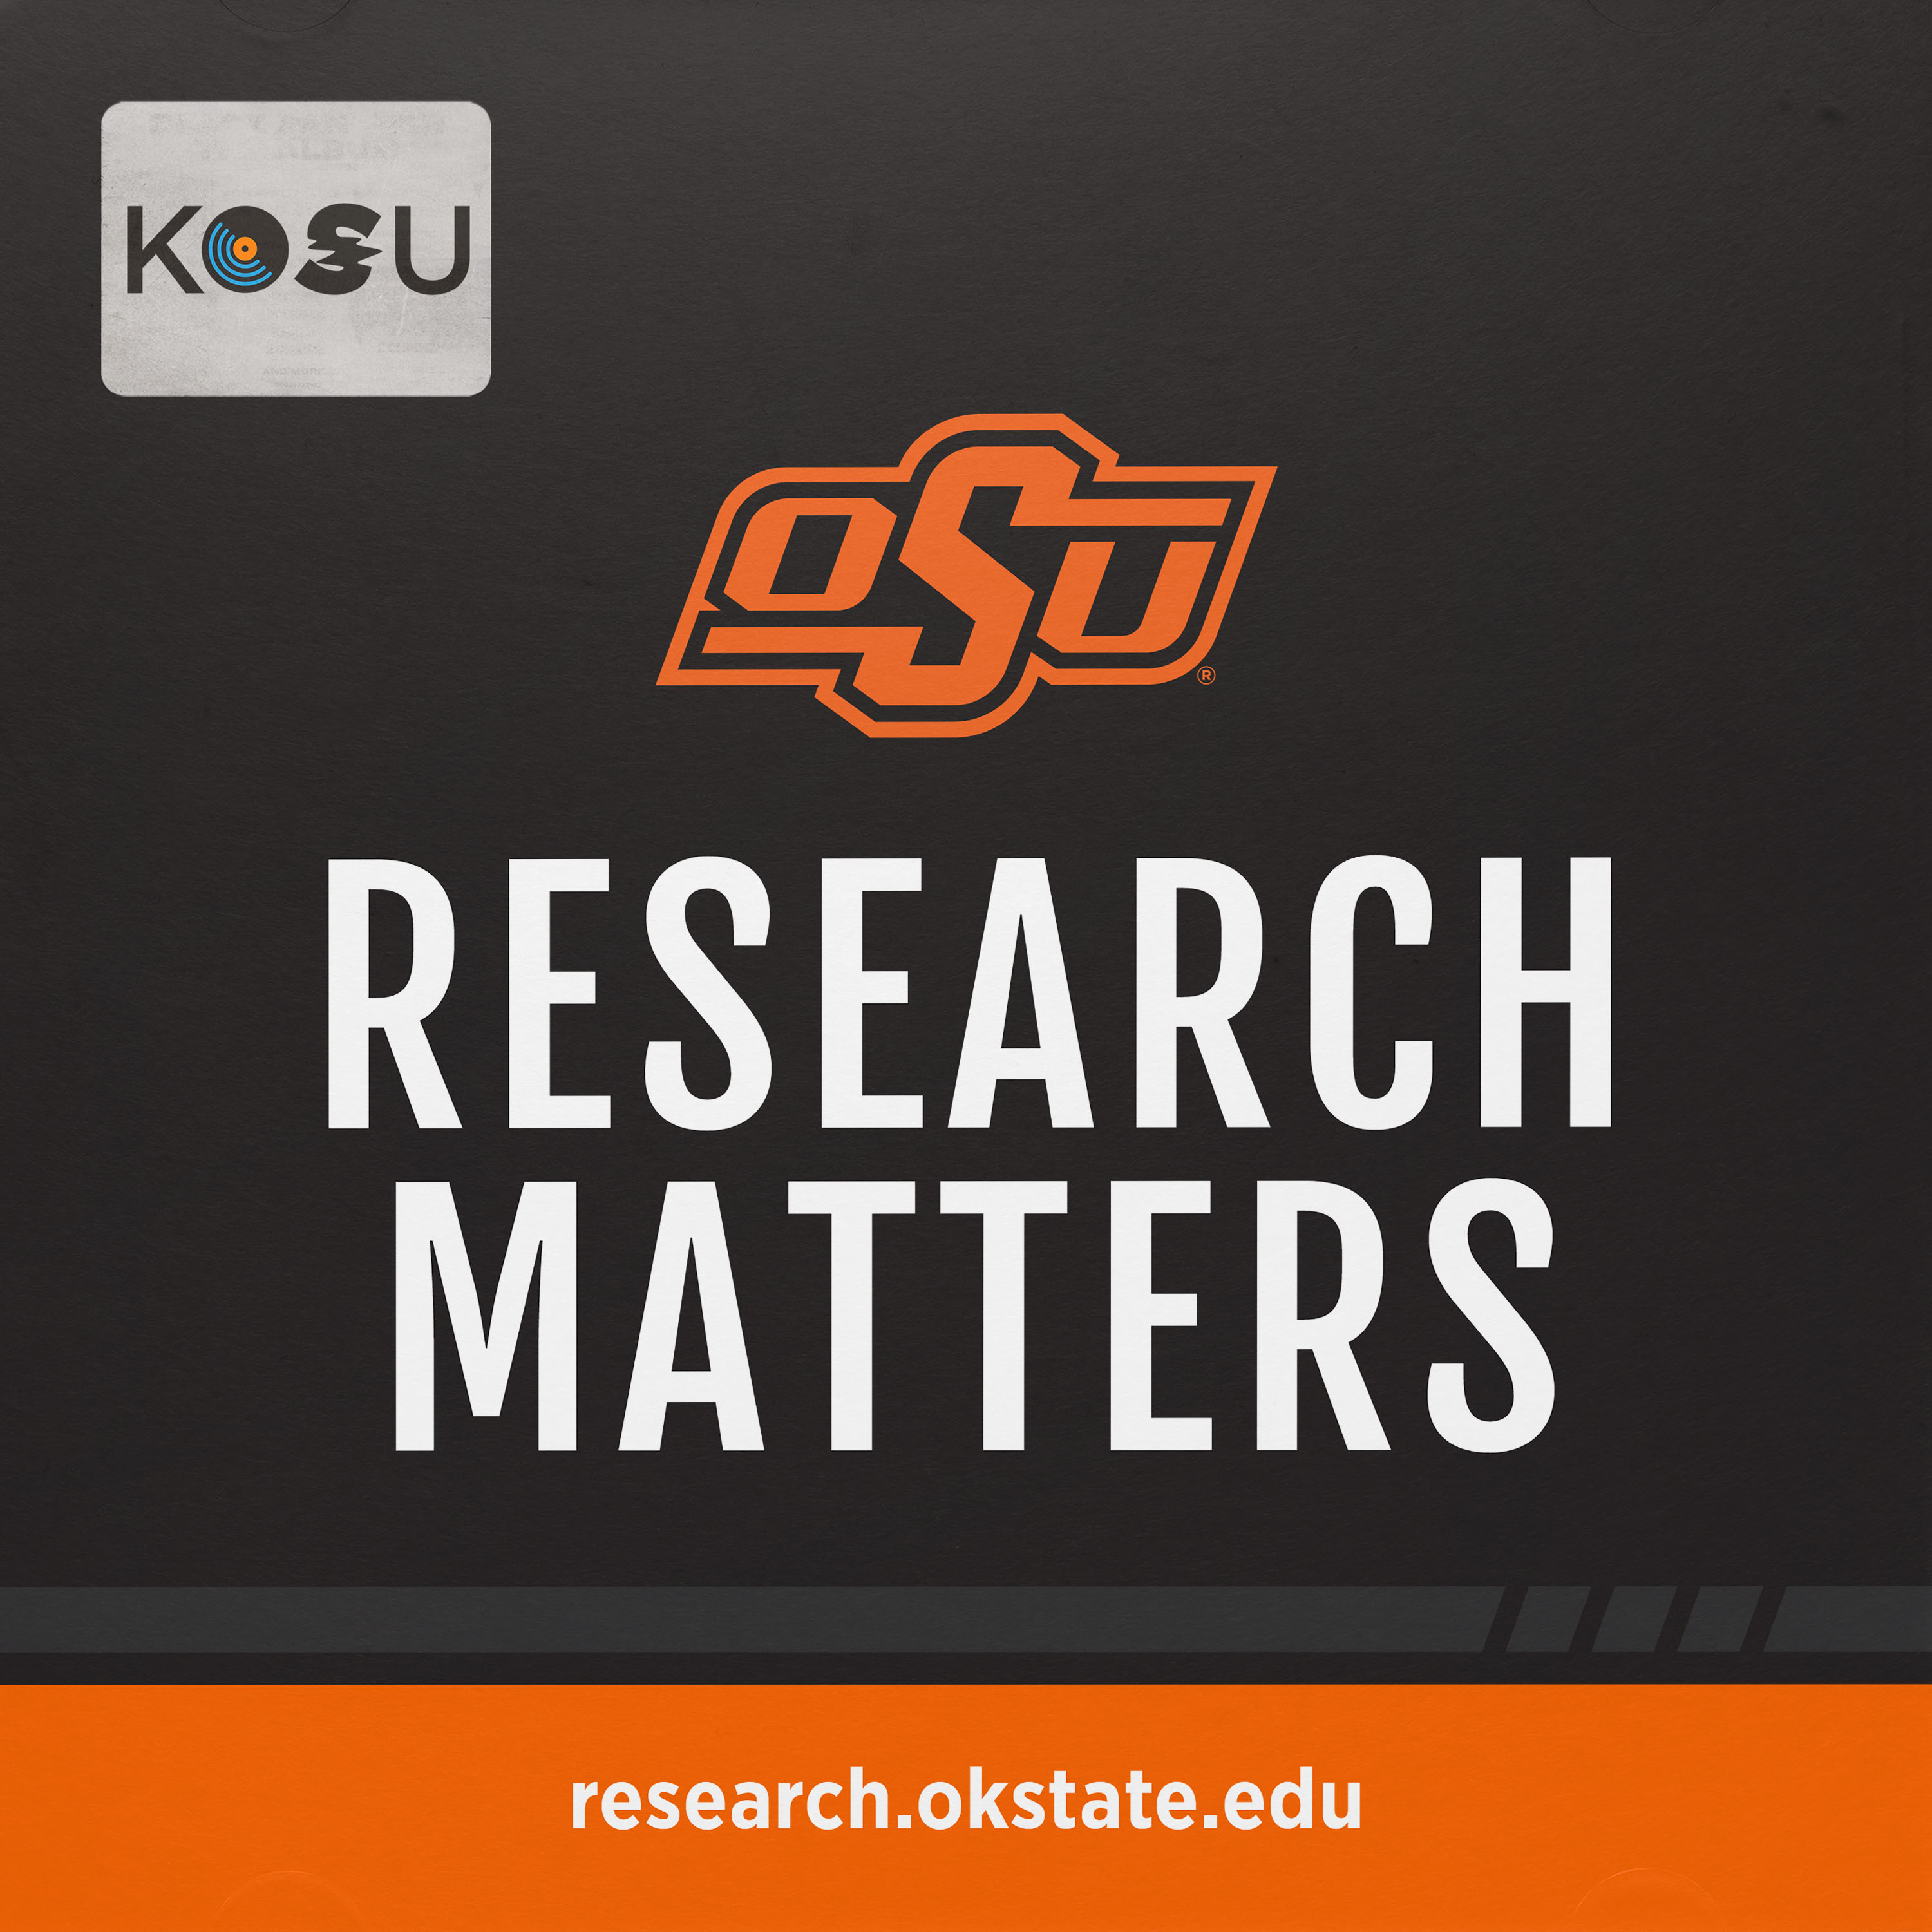 Artwork for podcast OSU Research Matters